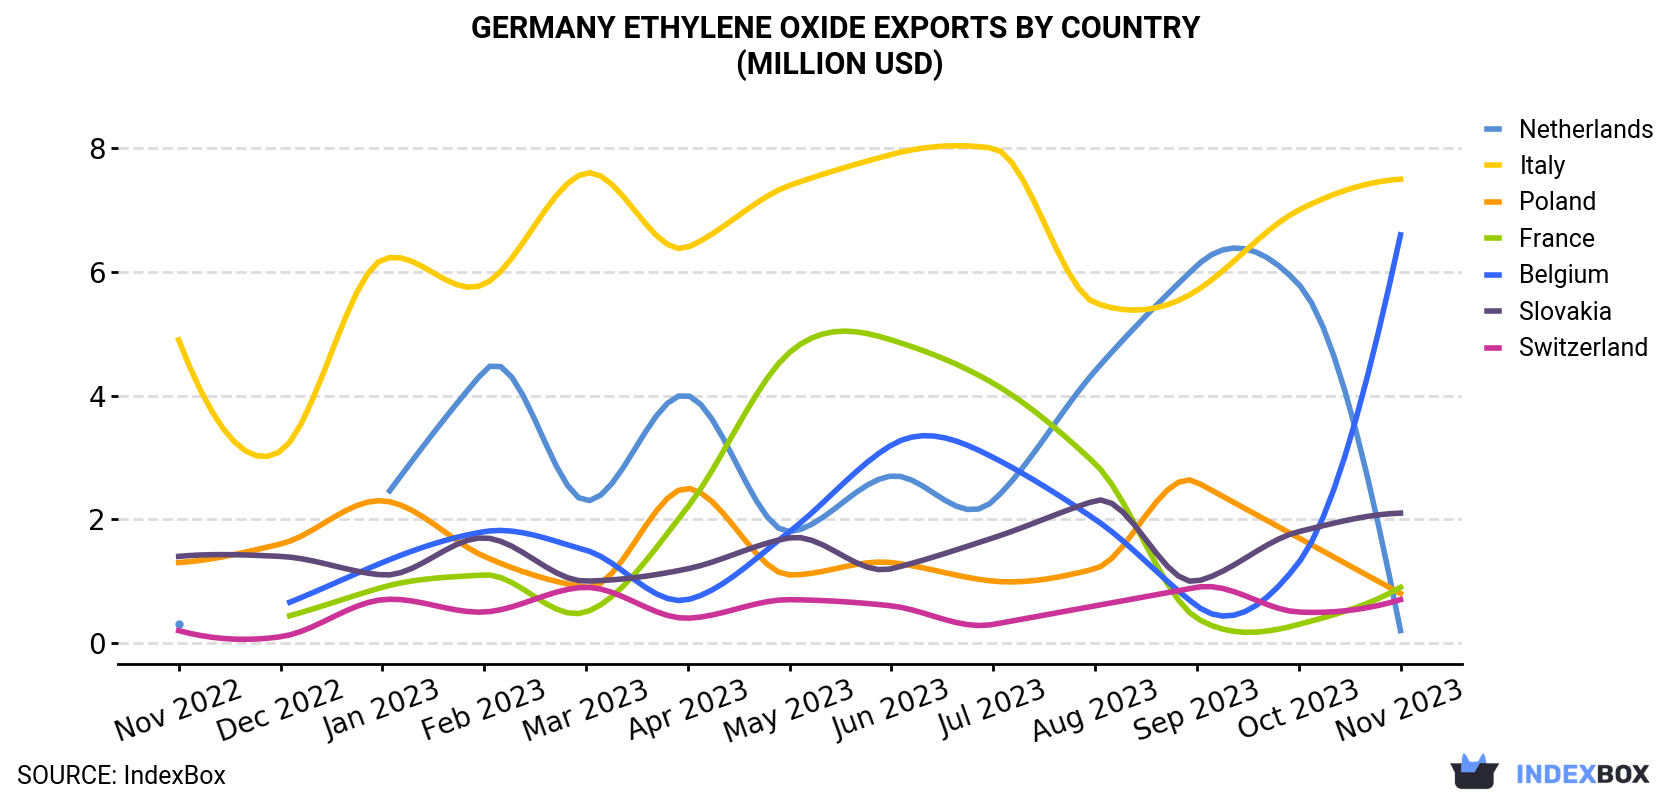 Germany Ethylene Oxide Exports By Country (Million USD)